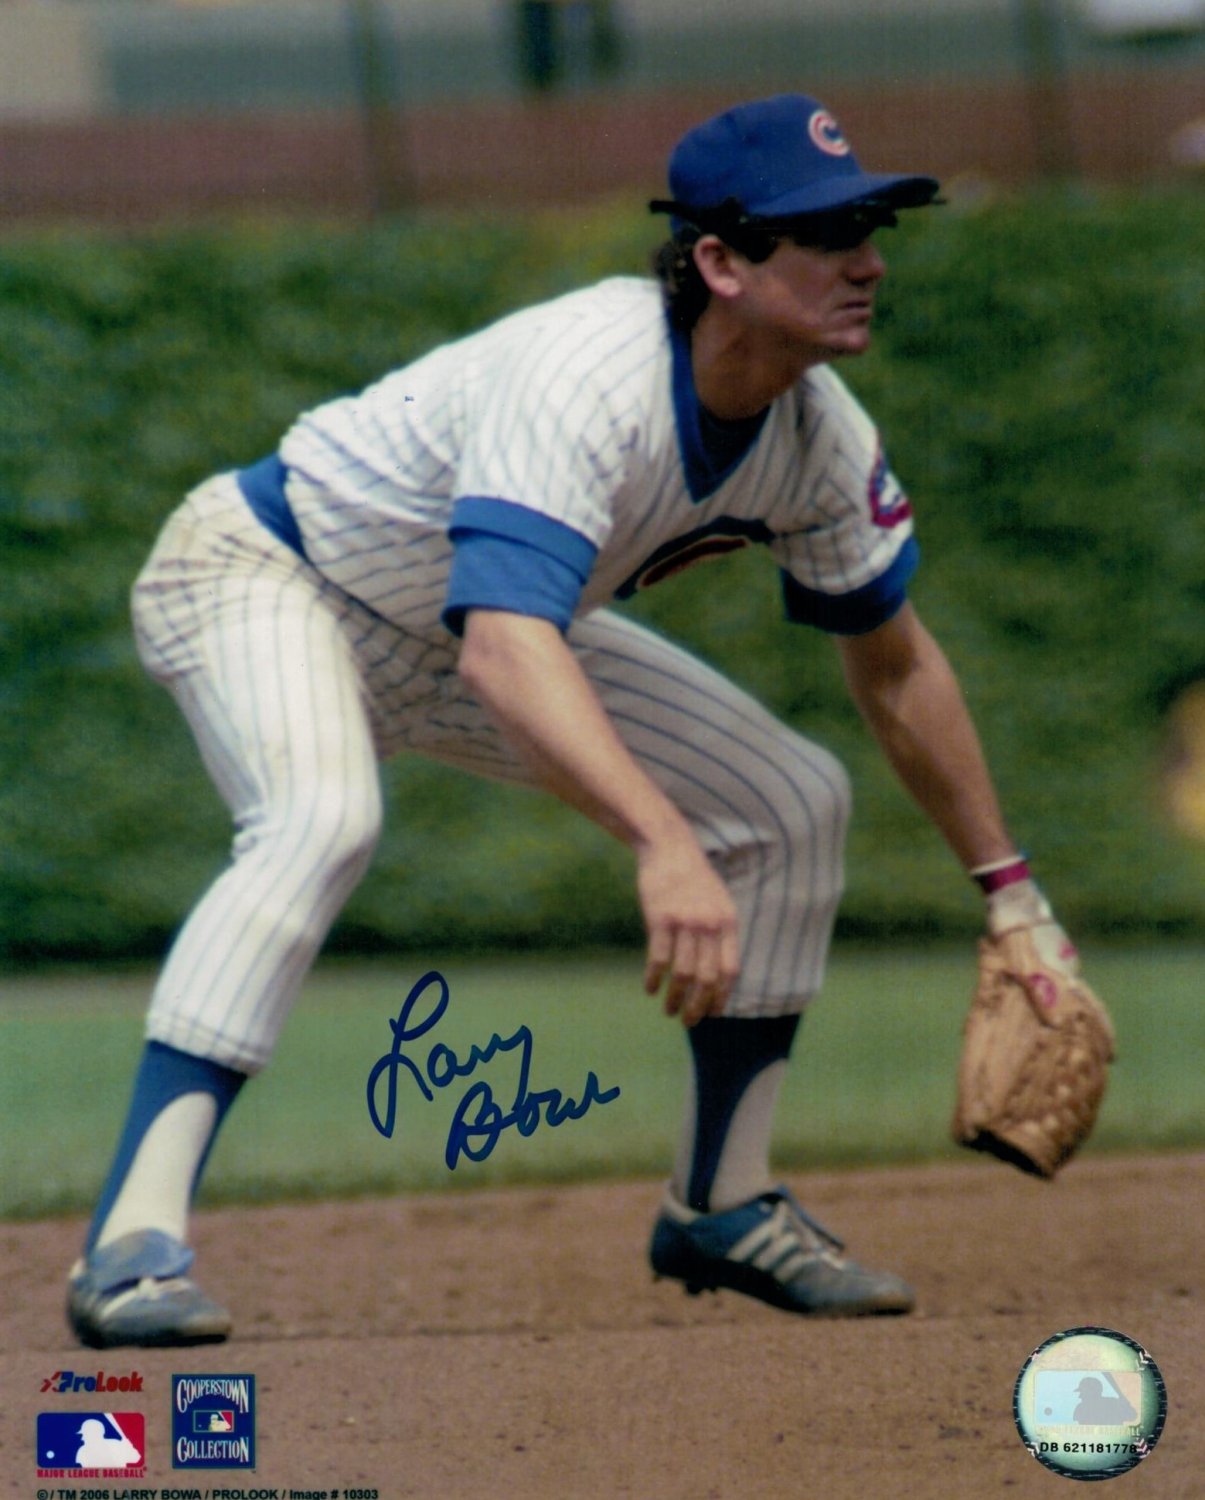 Larry Bowa Chicago Cubs Autographed Signed 8x10 Photo - Certified Authentic